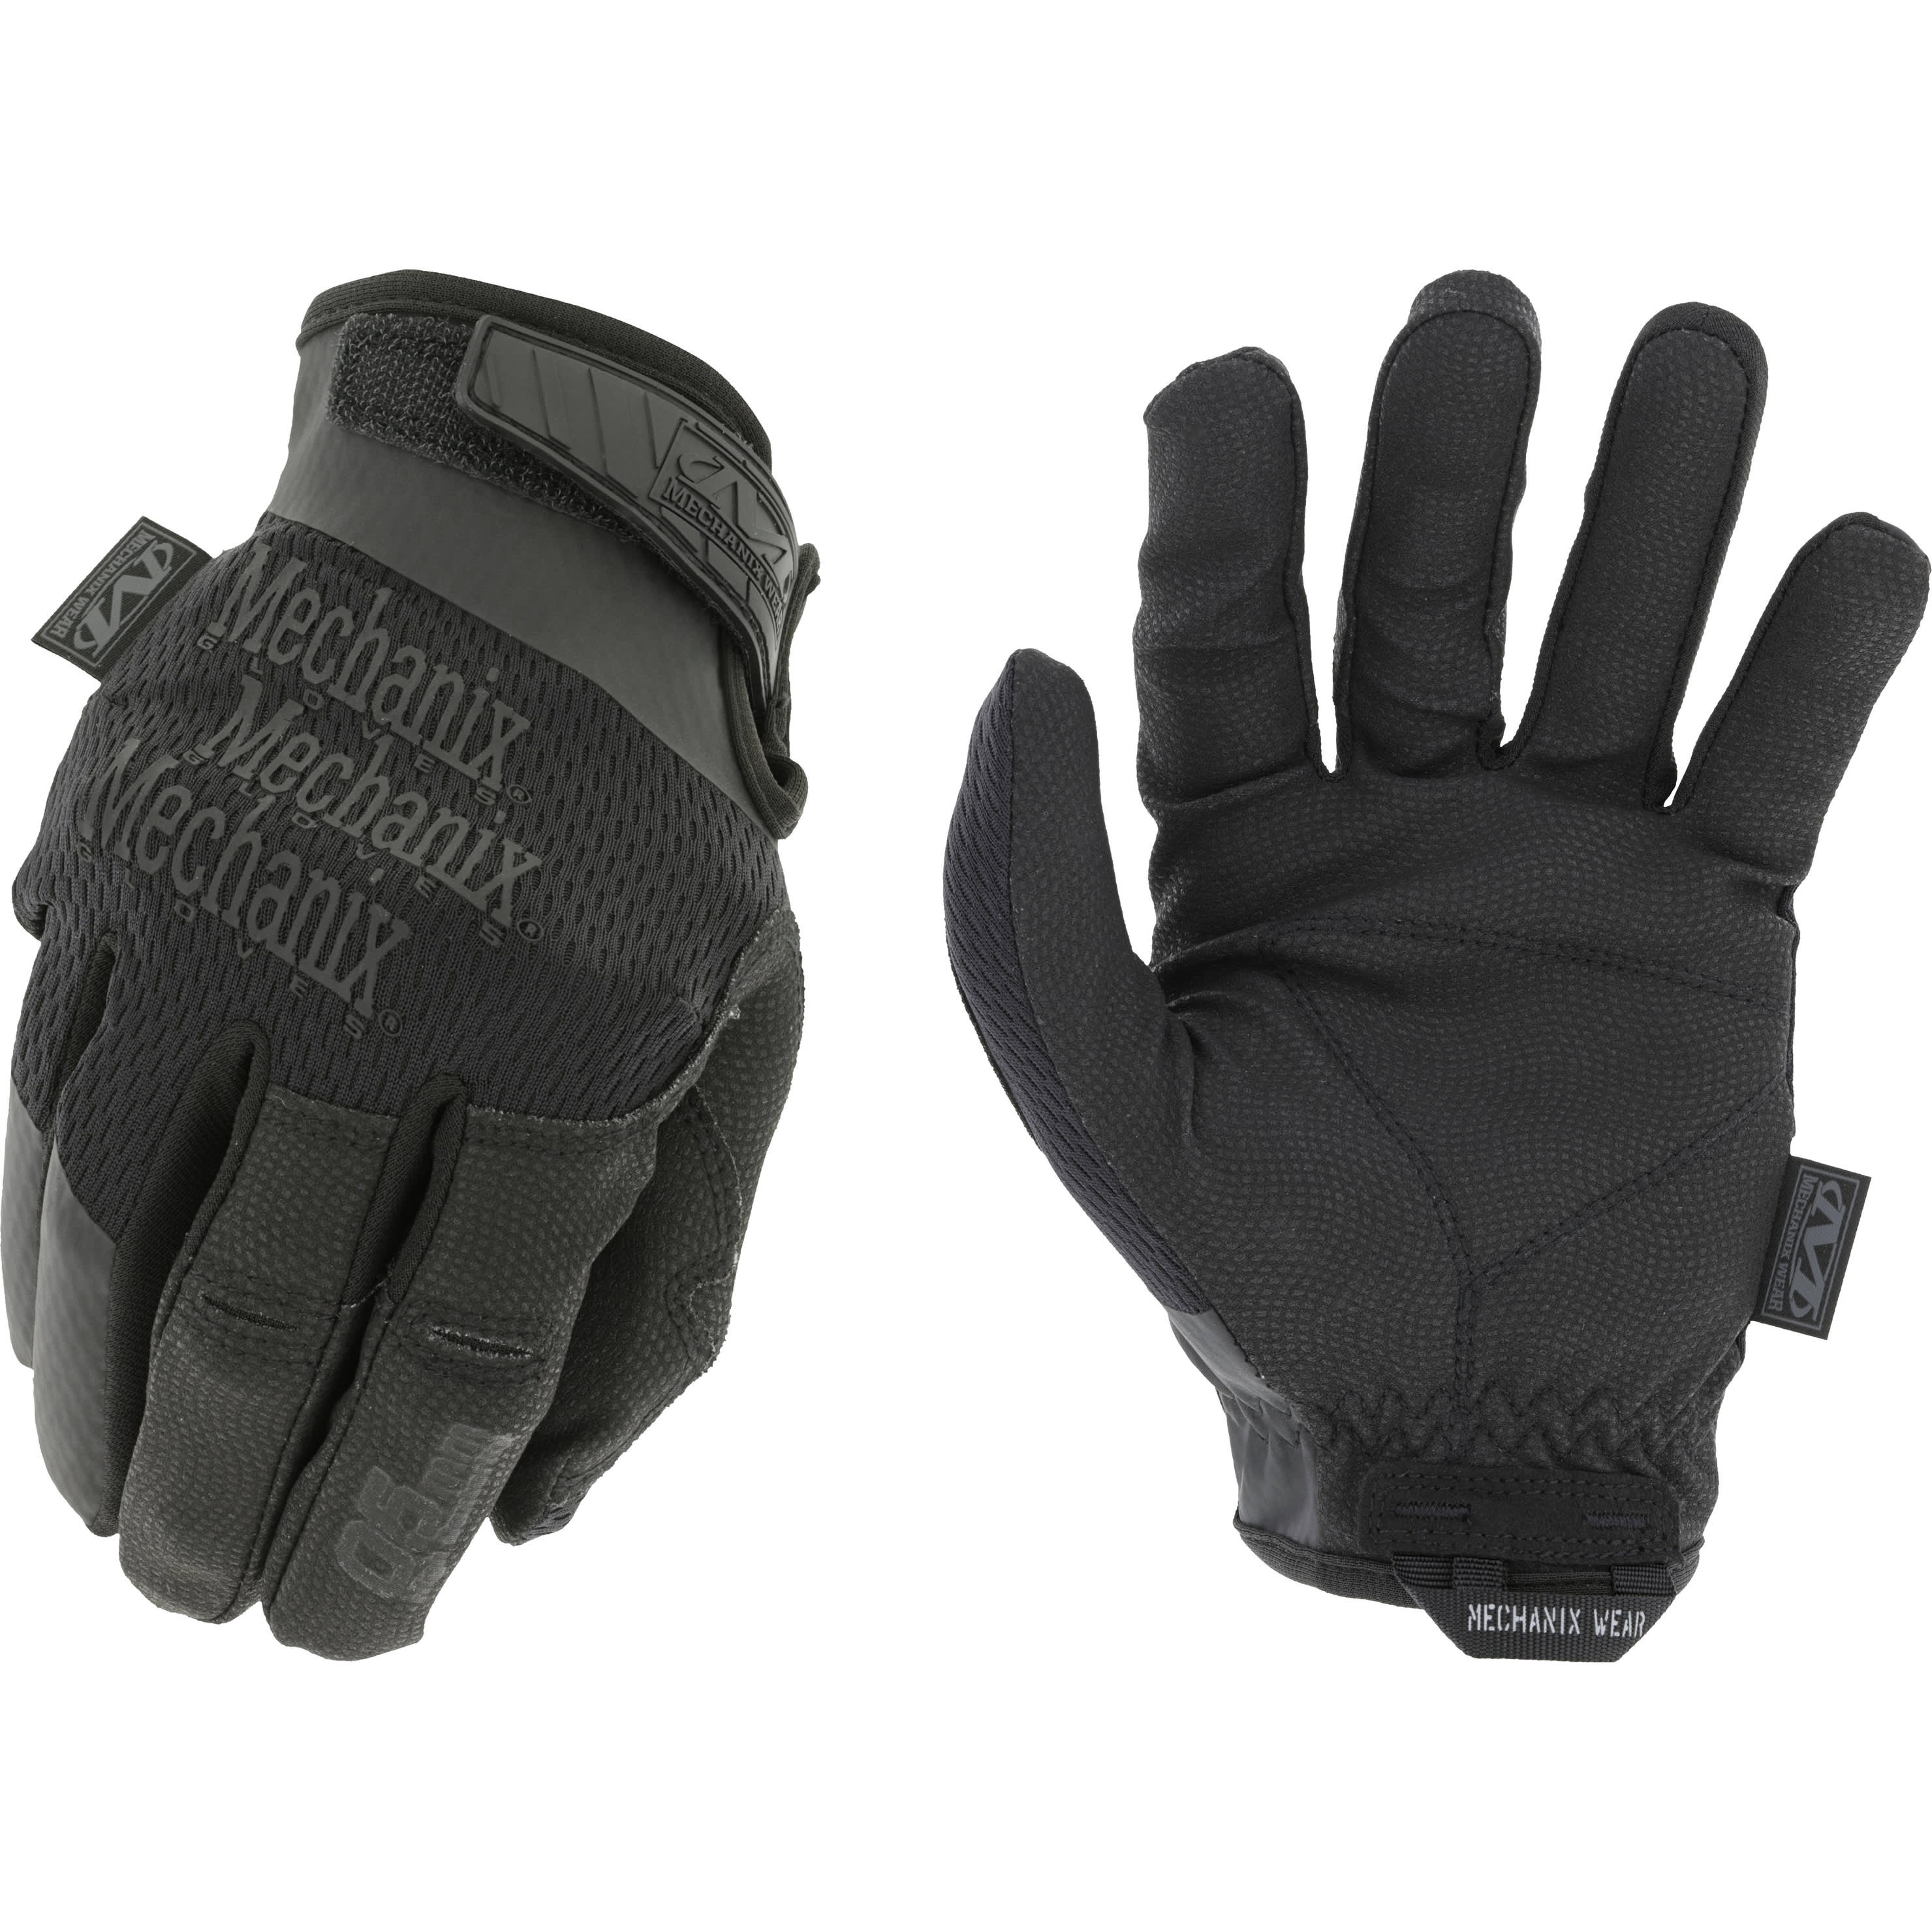 Men's Shooting Gloves with Rubber Palm